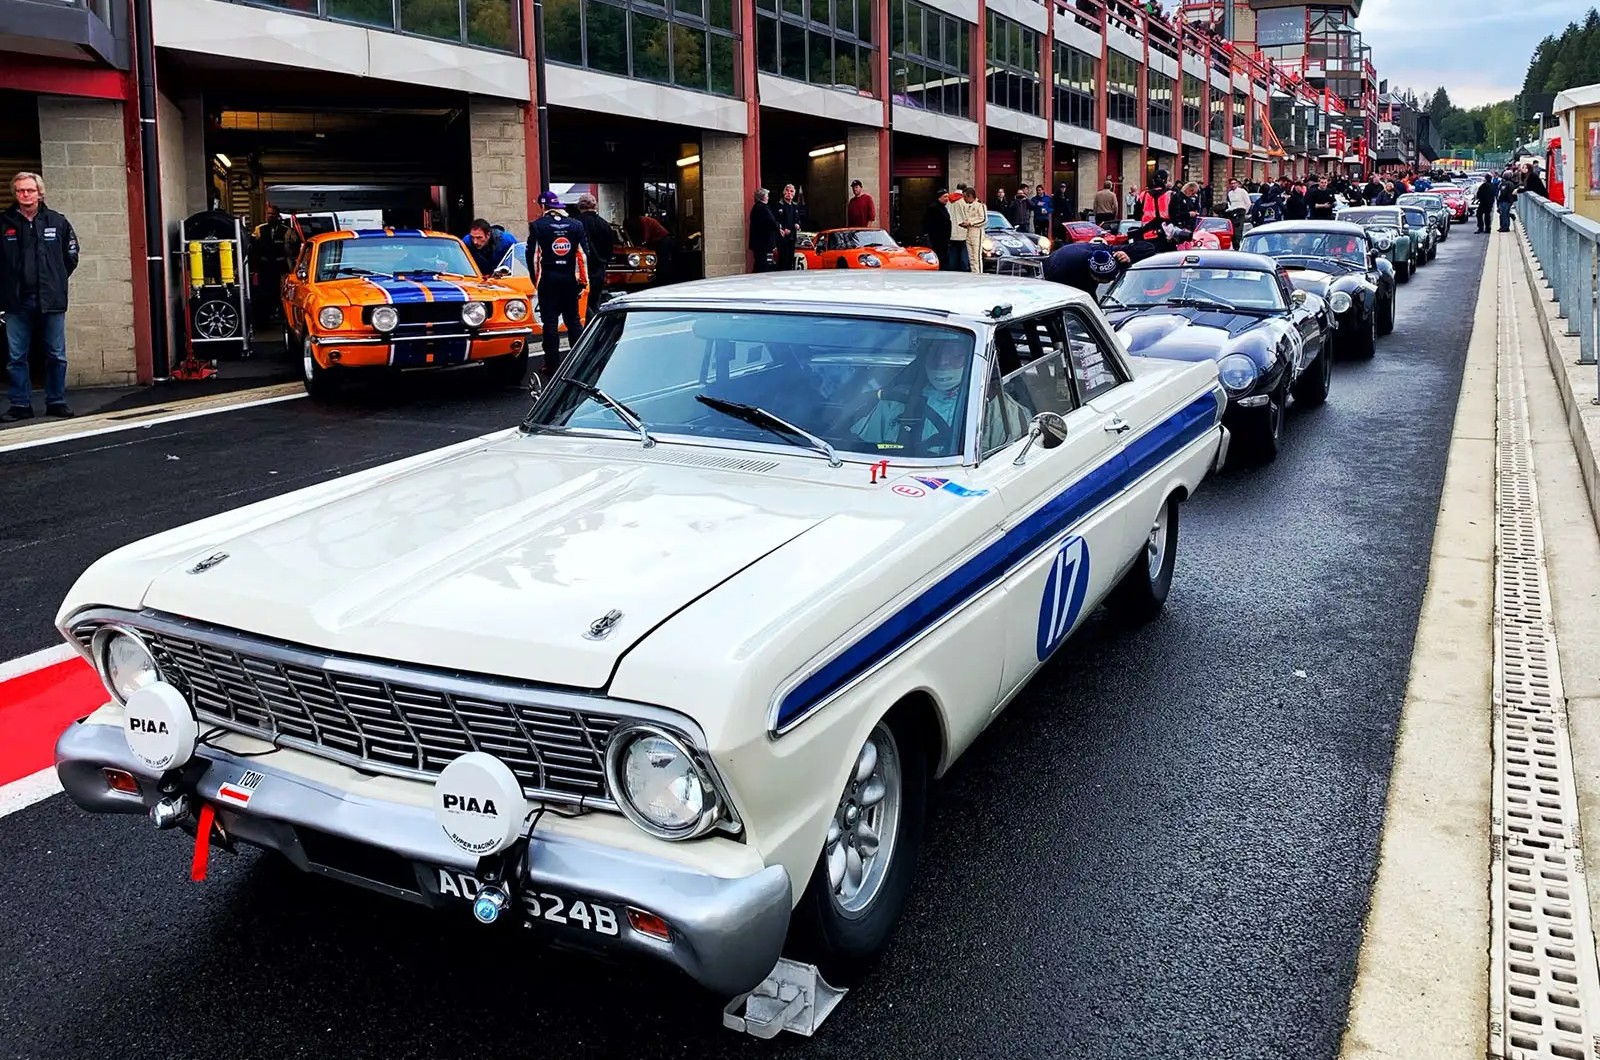 <p>When the Ford Falcon Sprint Monte Carlo first showed up in the European rally scene, it must have had its fair share of doubters. After all, the hulking American beast was up against much smaller cars such as Minis and Triumph TR4s.</p><p>However, the Ford Falcon Sprint Monte Carlo was innovatively designed for the time, with features such as lightweight body panels, Thunderbird disc brakes, and a Galaxie limited slip differential. Despite its size, the Falcon achieved significant success, including class victories at the Shell 4000 in Canada and the Alpine Rally, outright wins at the Geneva Rally and Tulip Rally, and a second-place finish at the 1964 Monte Carlo Rally.</p>